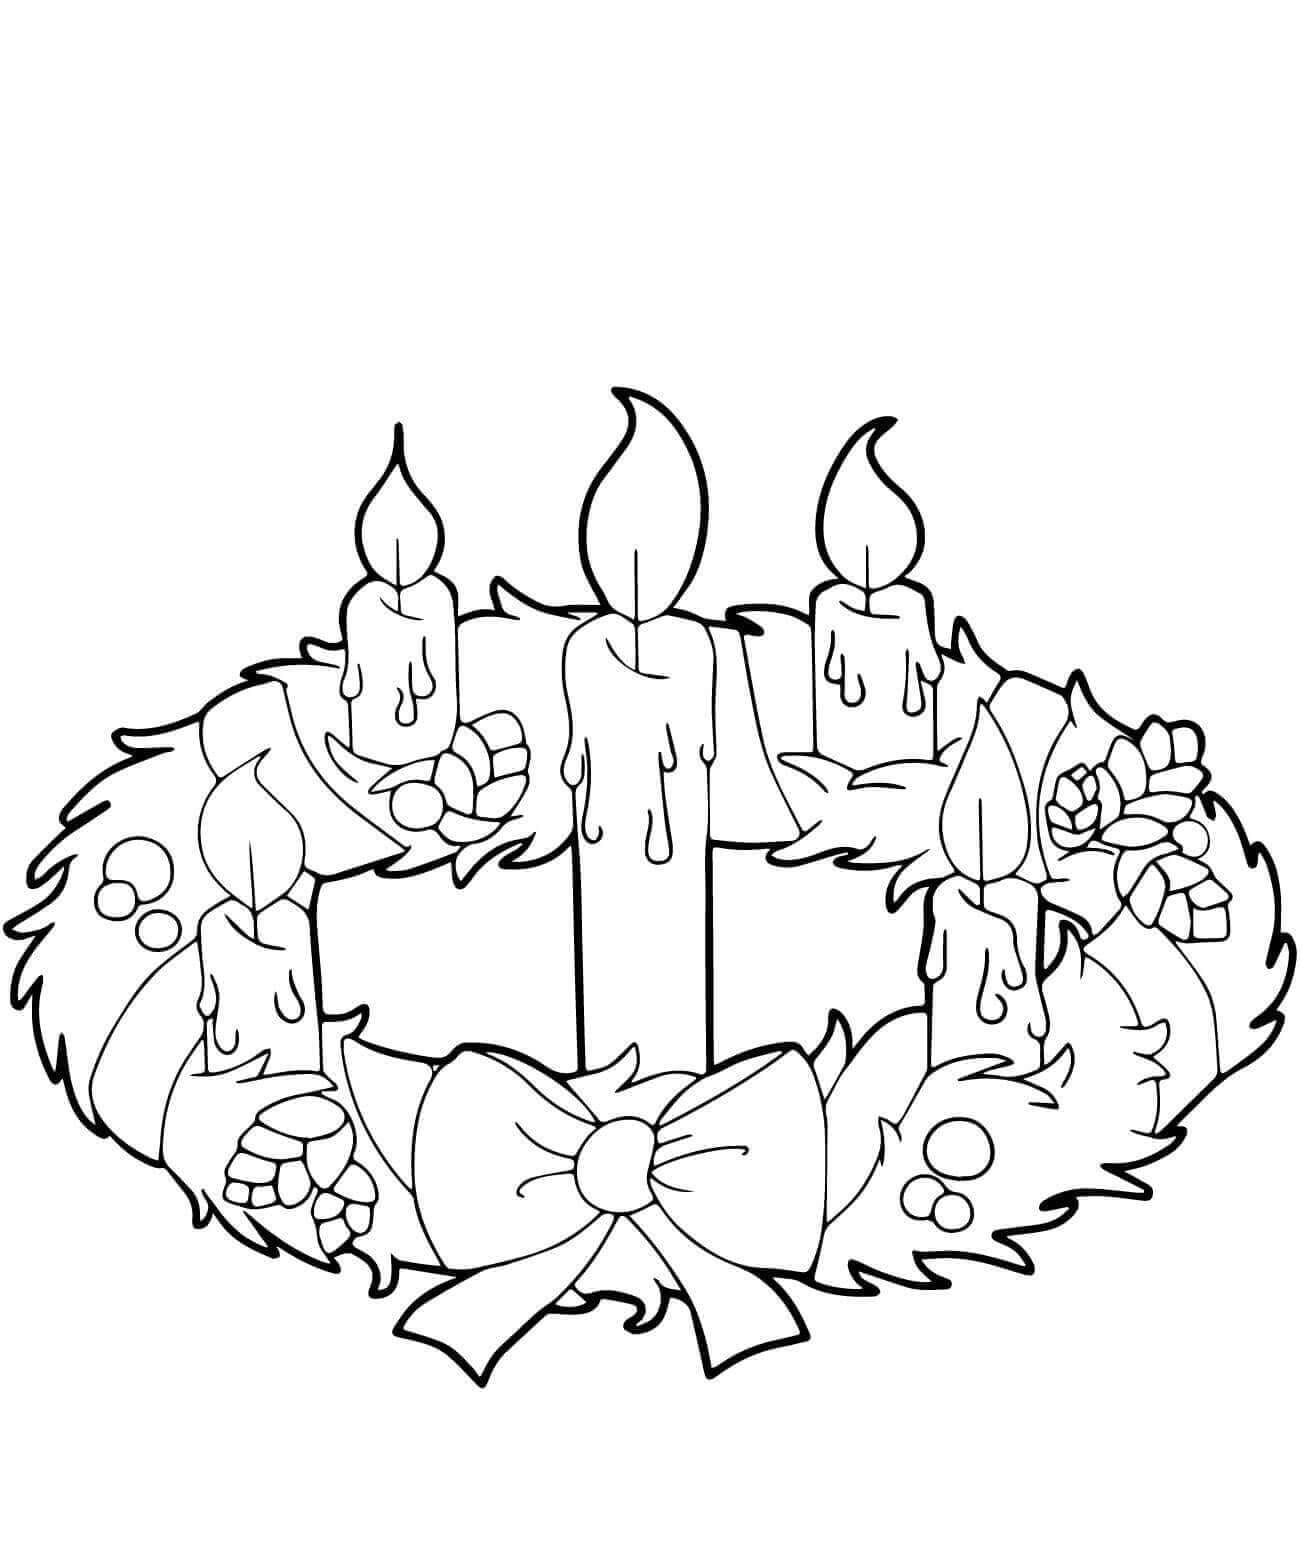 Free Printable Advent Wreath Coloring Pages